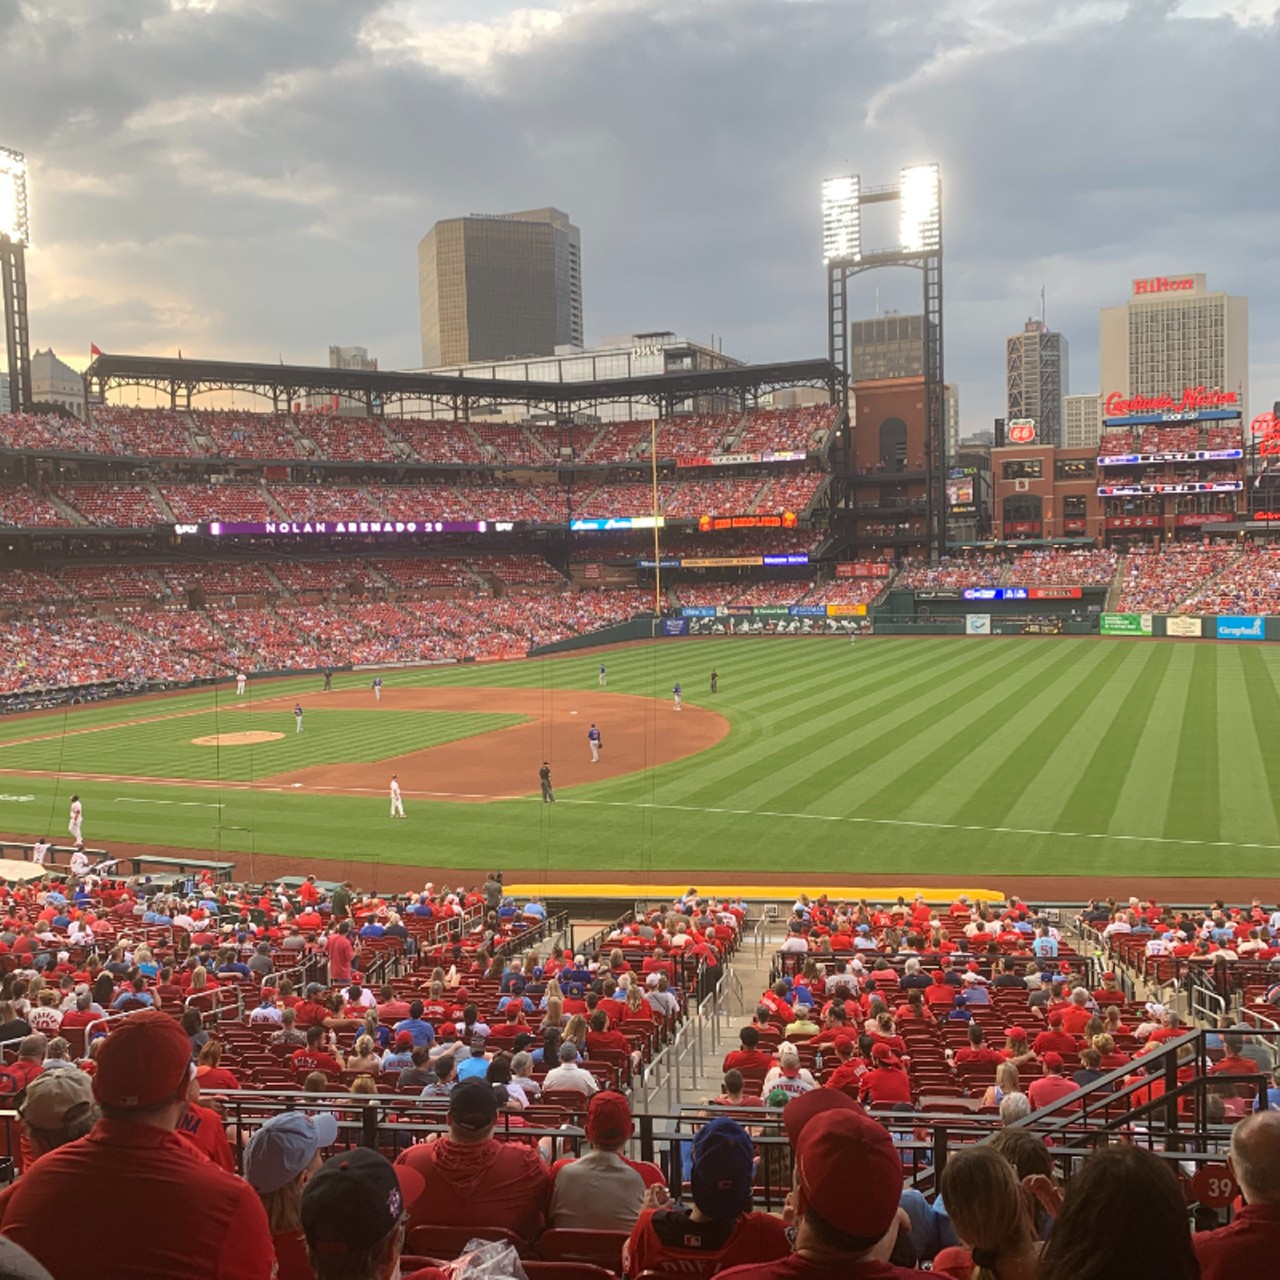 St. Louis Cardinals vs. Chicago Cubs Rivalry Game Series May 23, 2021  [PHOTOS], St. Louis